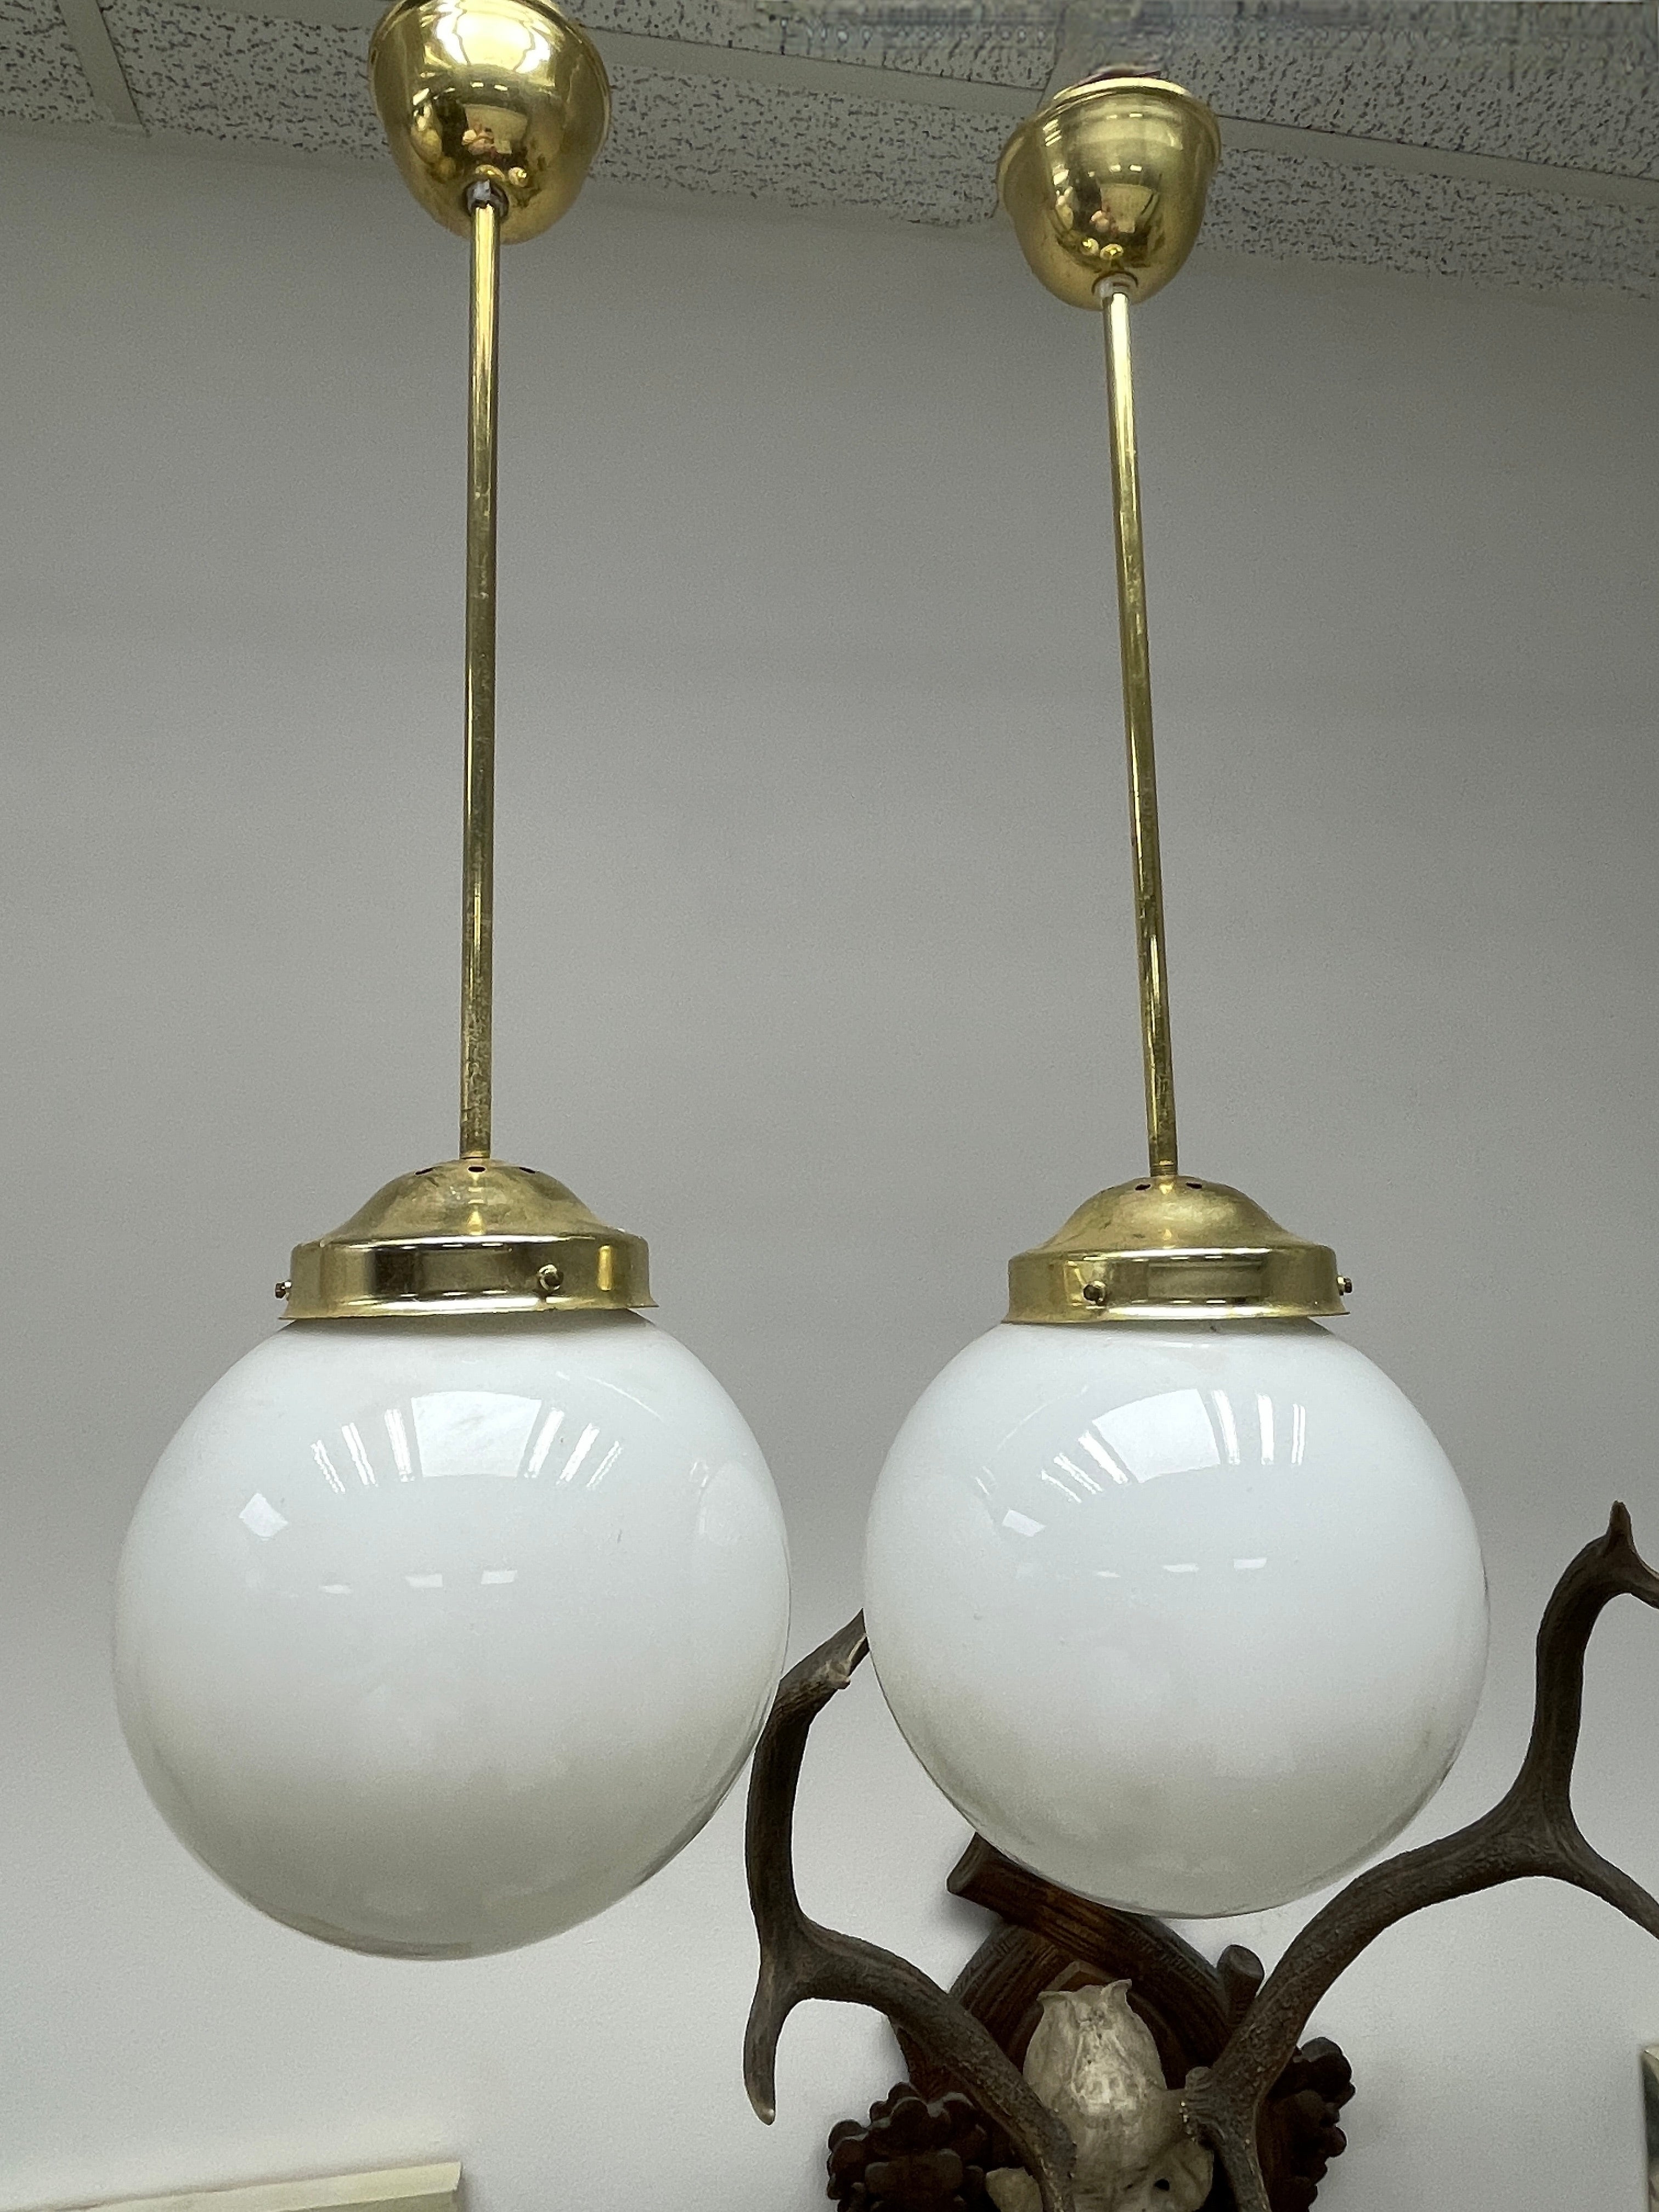 Add a touch of opulence to your home with this charming set of two chandeliers or light pendants! Perfect brass fixtures hold a big milk glass globe, to enhance any chic or eclectic home. We'd love to see it hanging in an entryway as a charming